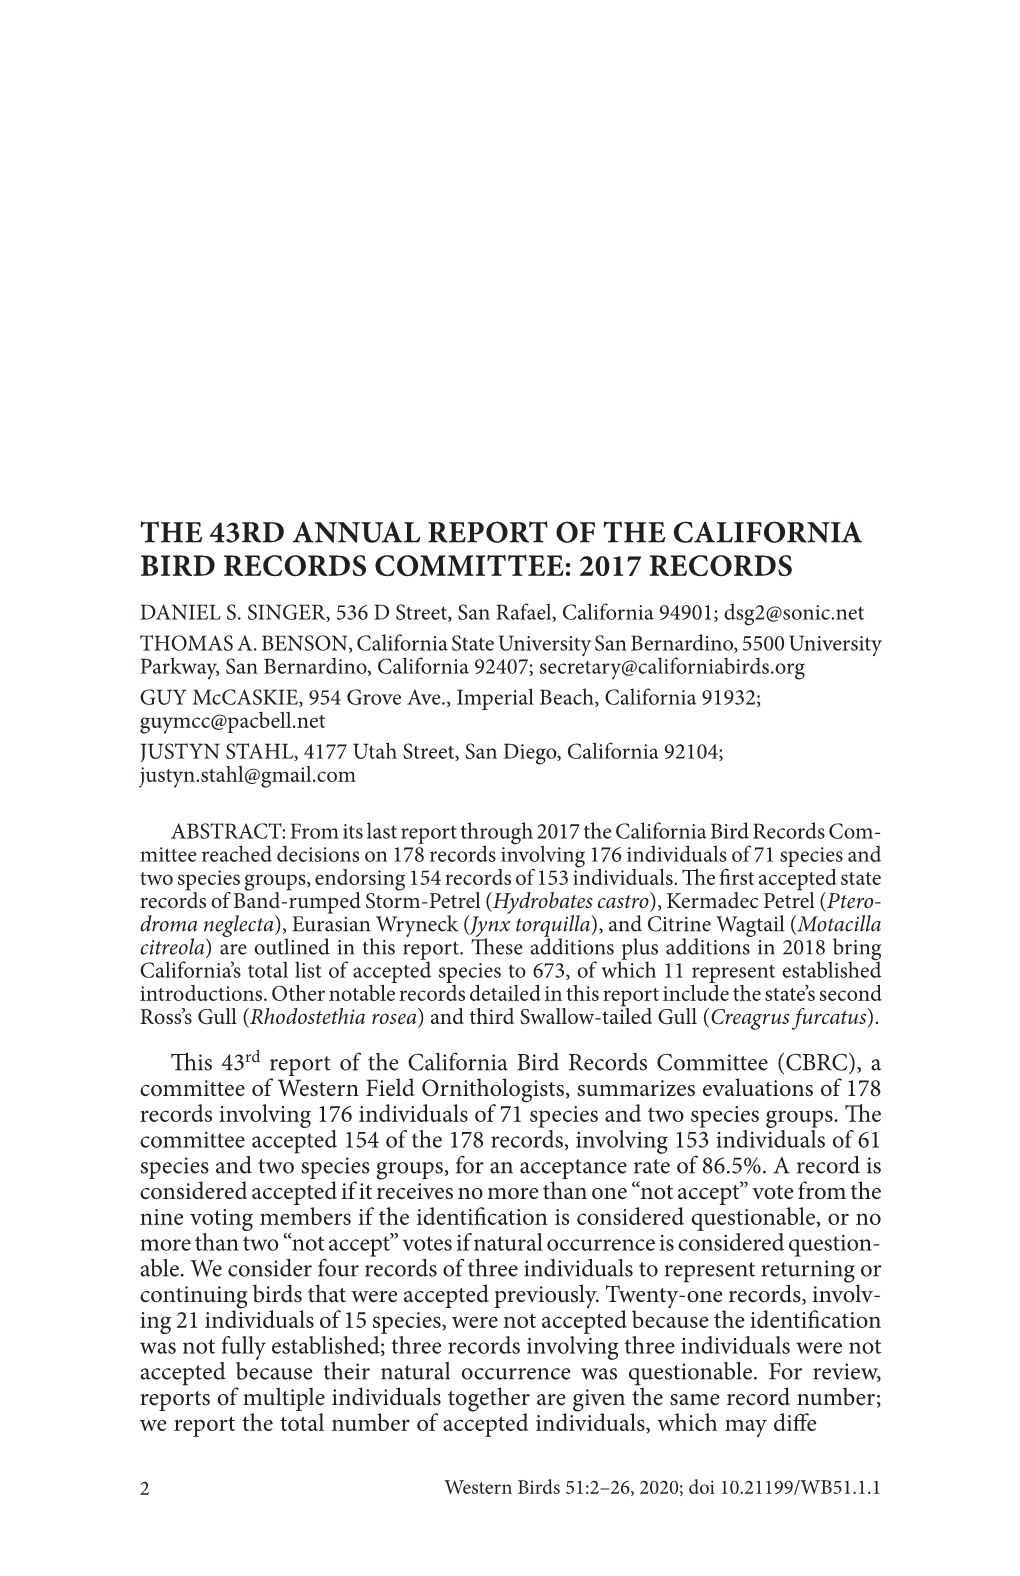 THE 43Rd ANNUAL REPORT of the CALIFORNIA BIRD RECORDS COMMITTEE: 2017 RECORDS DANIEL S